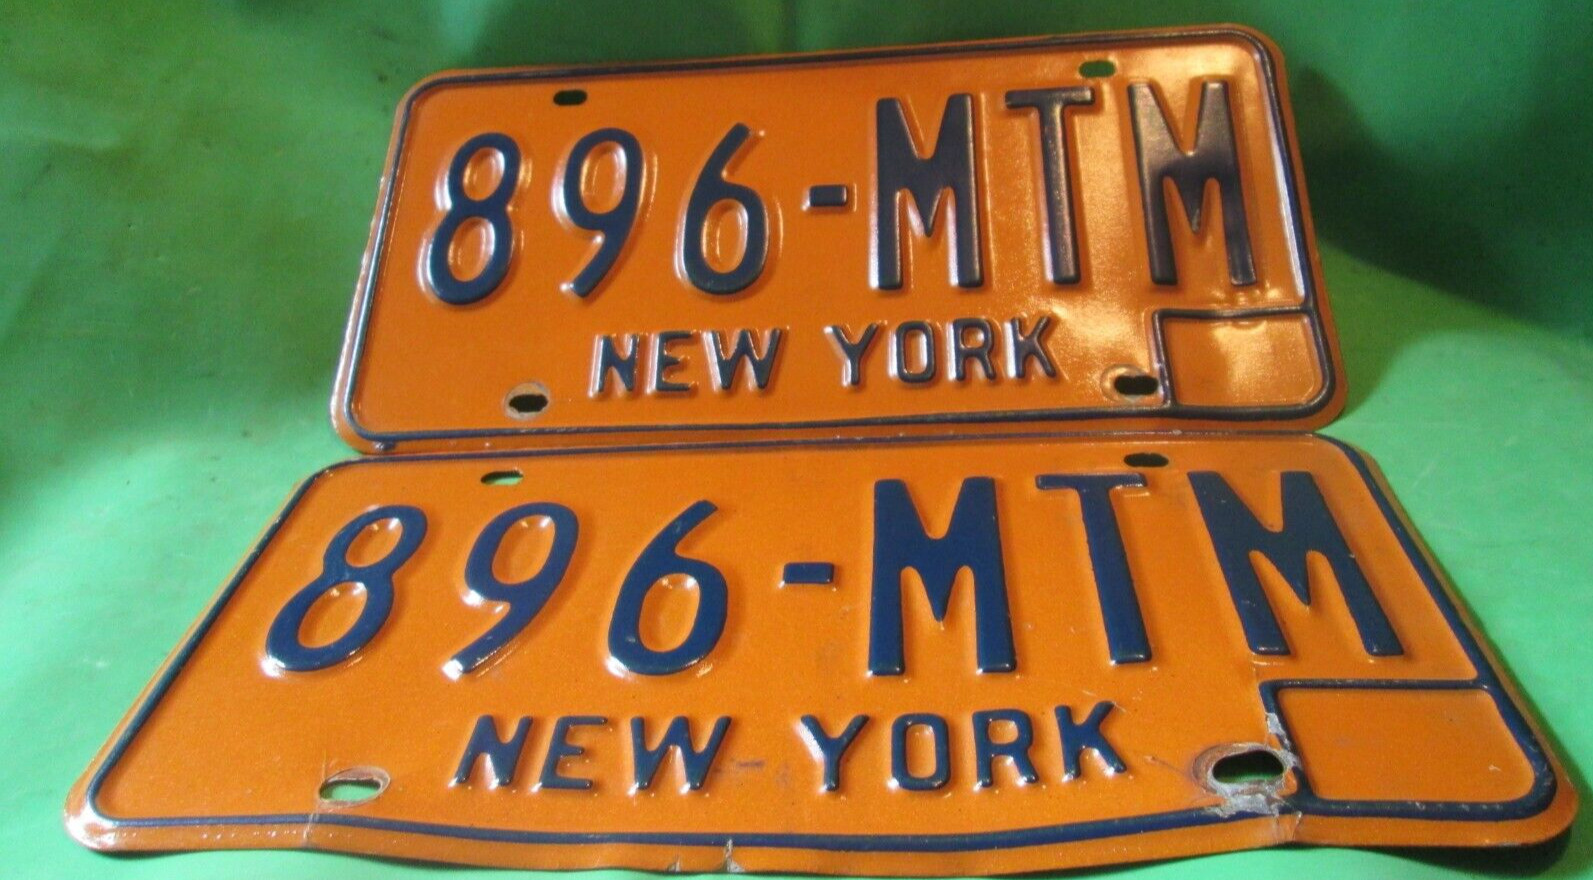 VINTAGE US NEW YORK STATE NY LICENSE PLATE TAG 896 MTM MORE PLATES LISTED